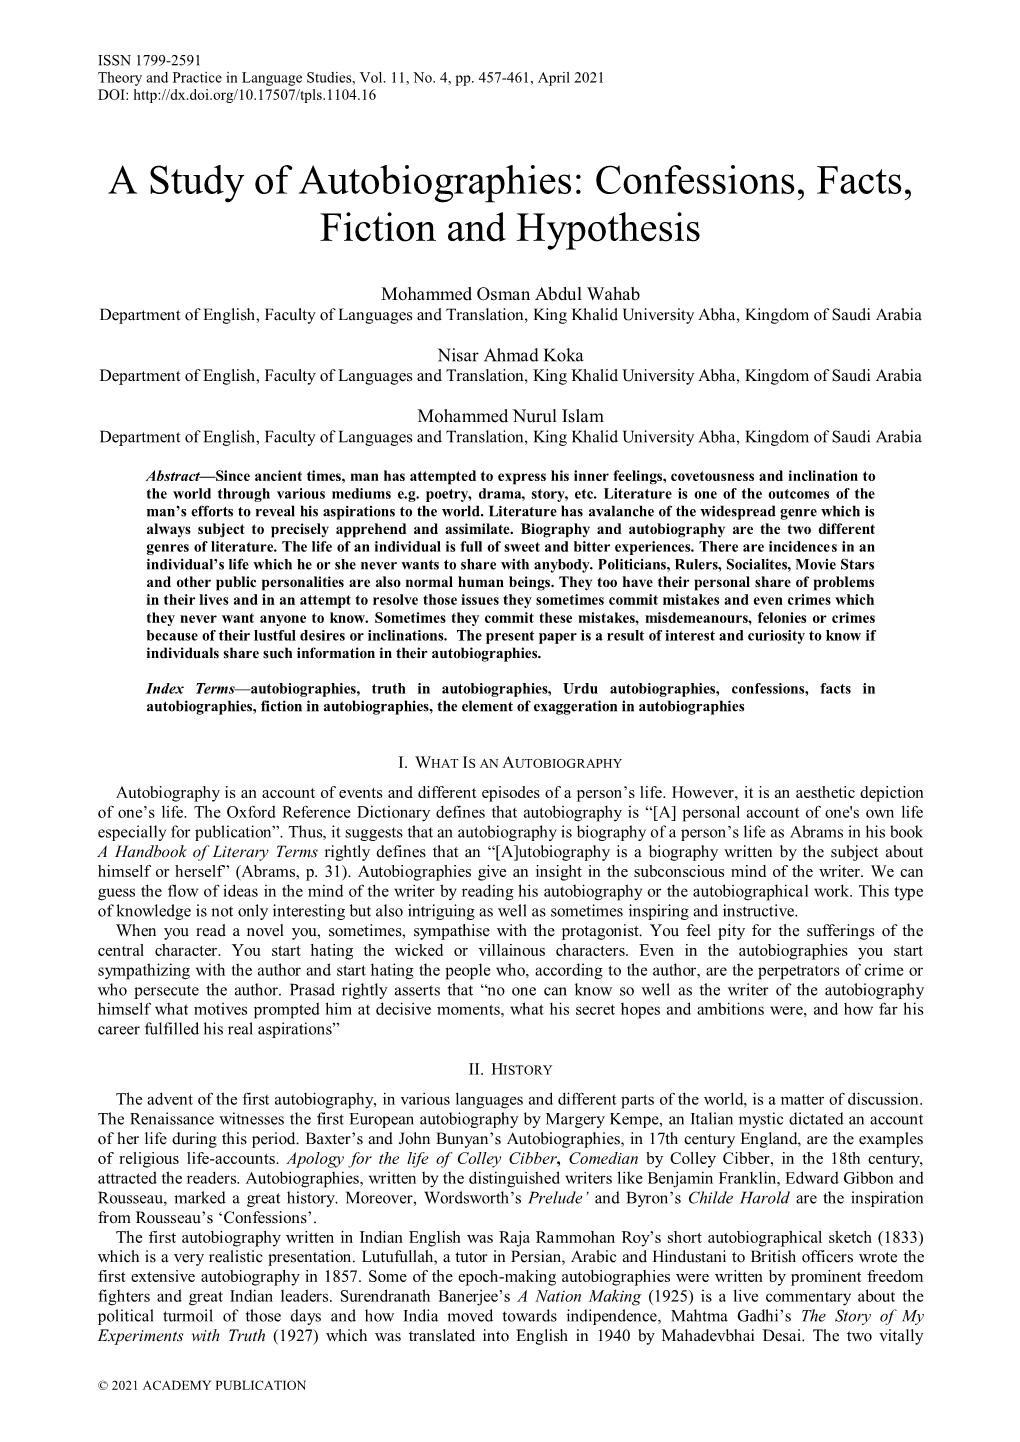 A Study of Autobiographies: Confessions, Facts, Fiction and Hypothesis